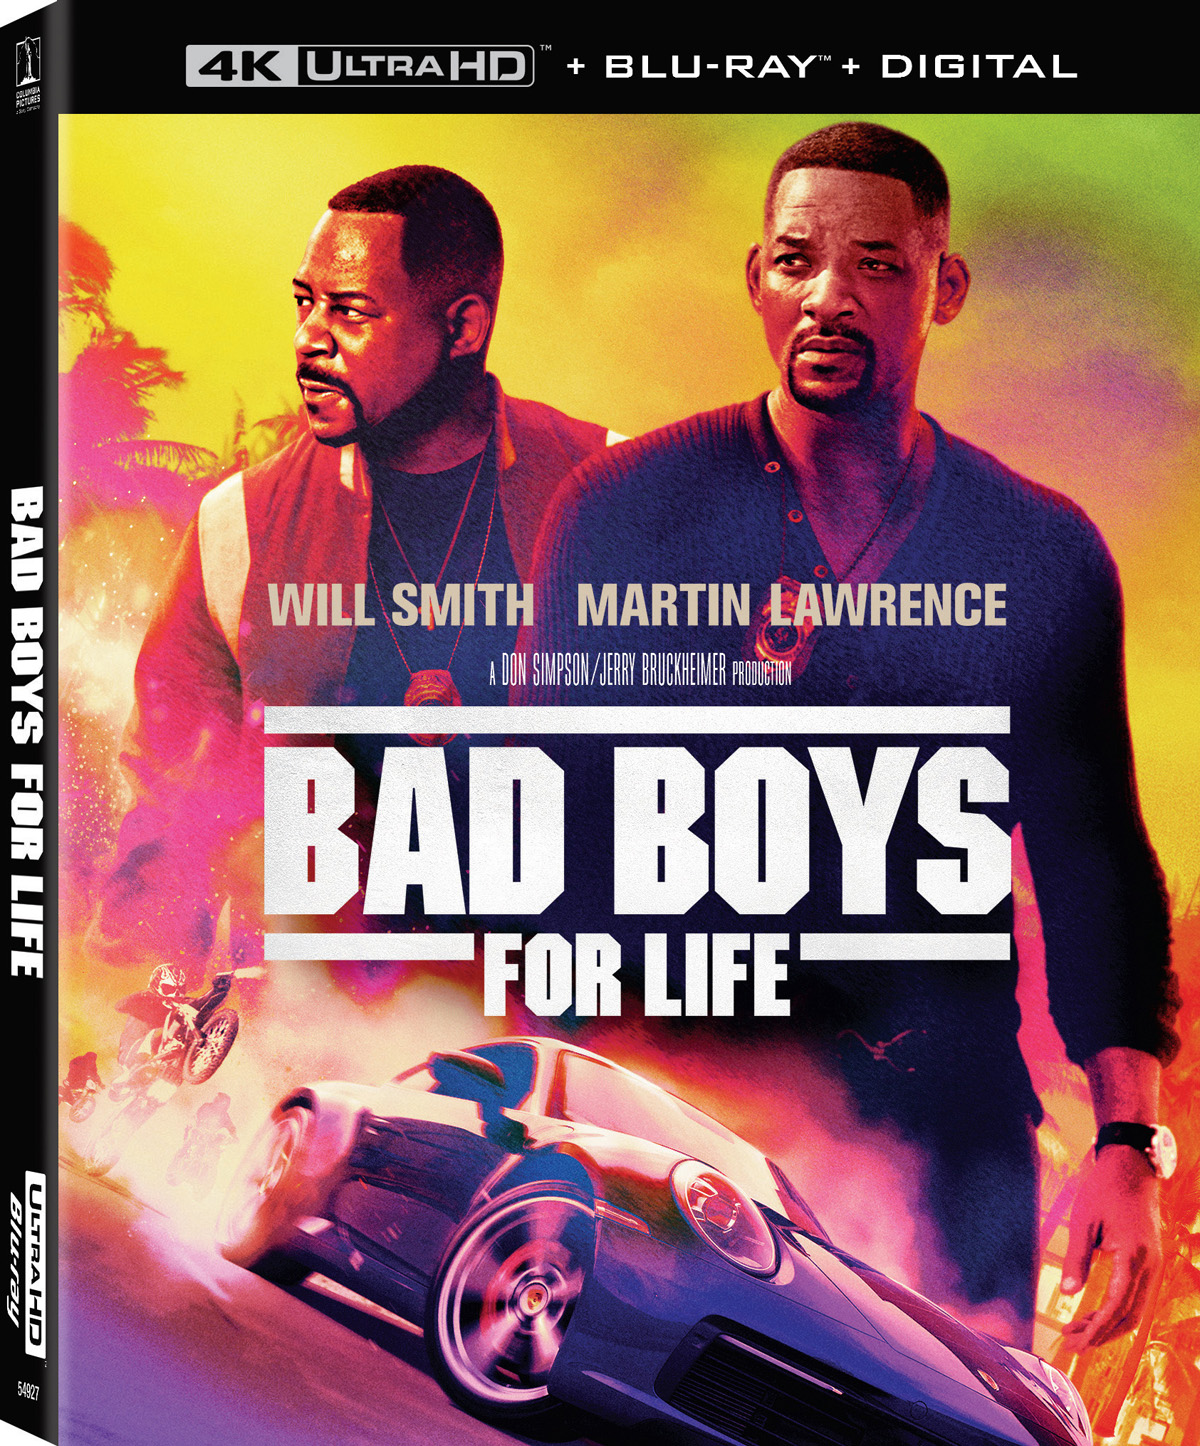 Bad Boys Shoot to 1 at the Box Office, Dolittle Does Little